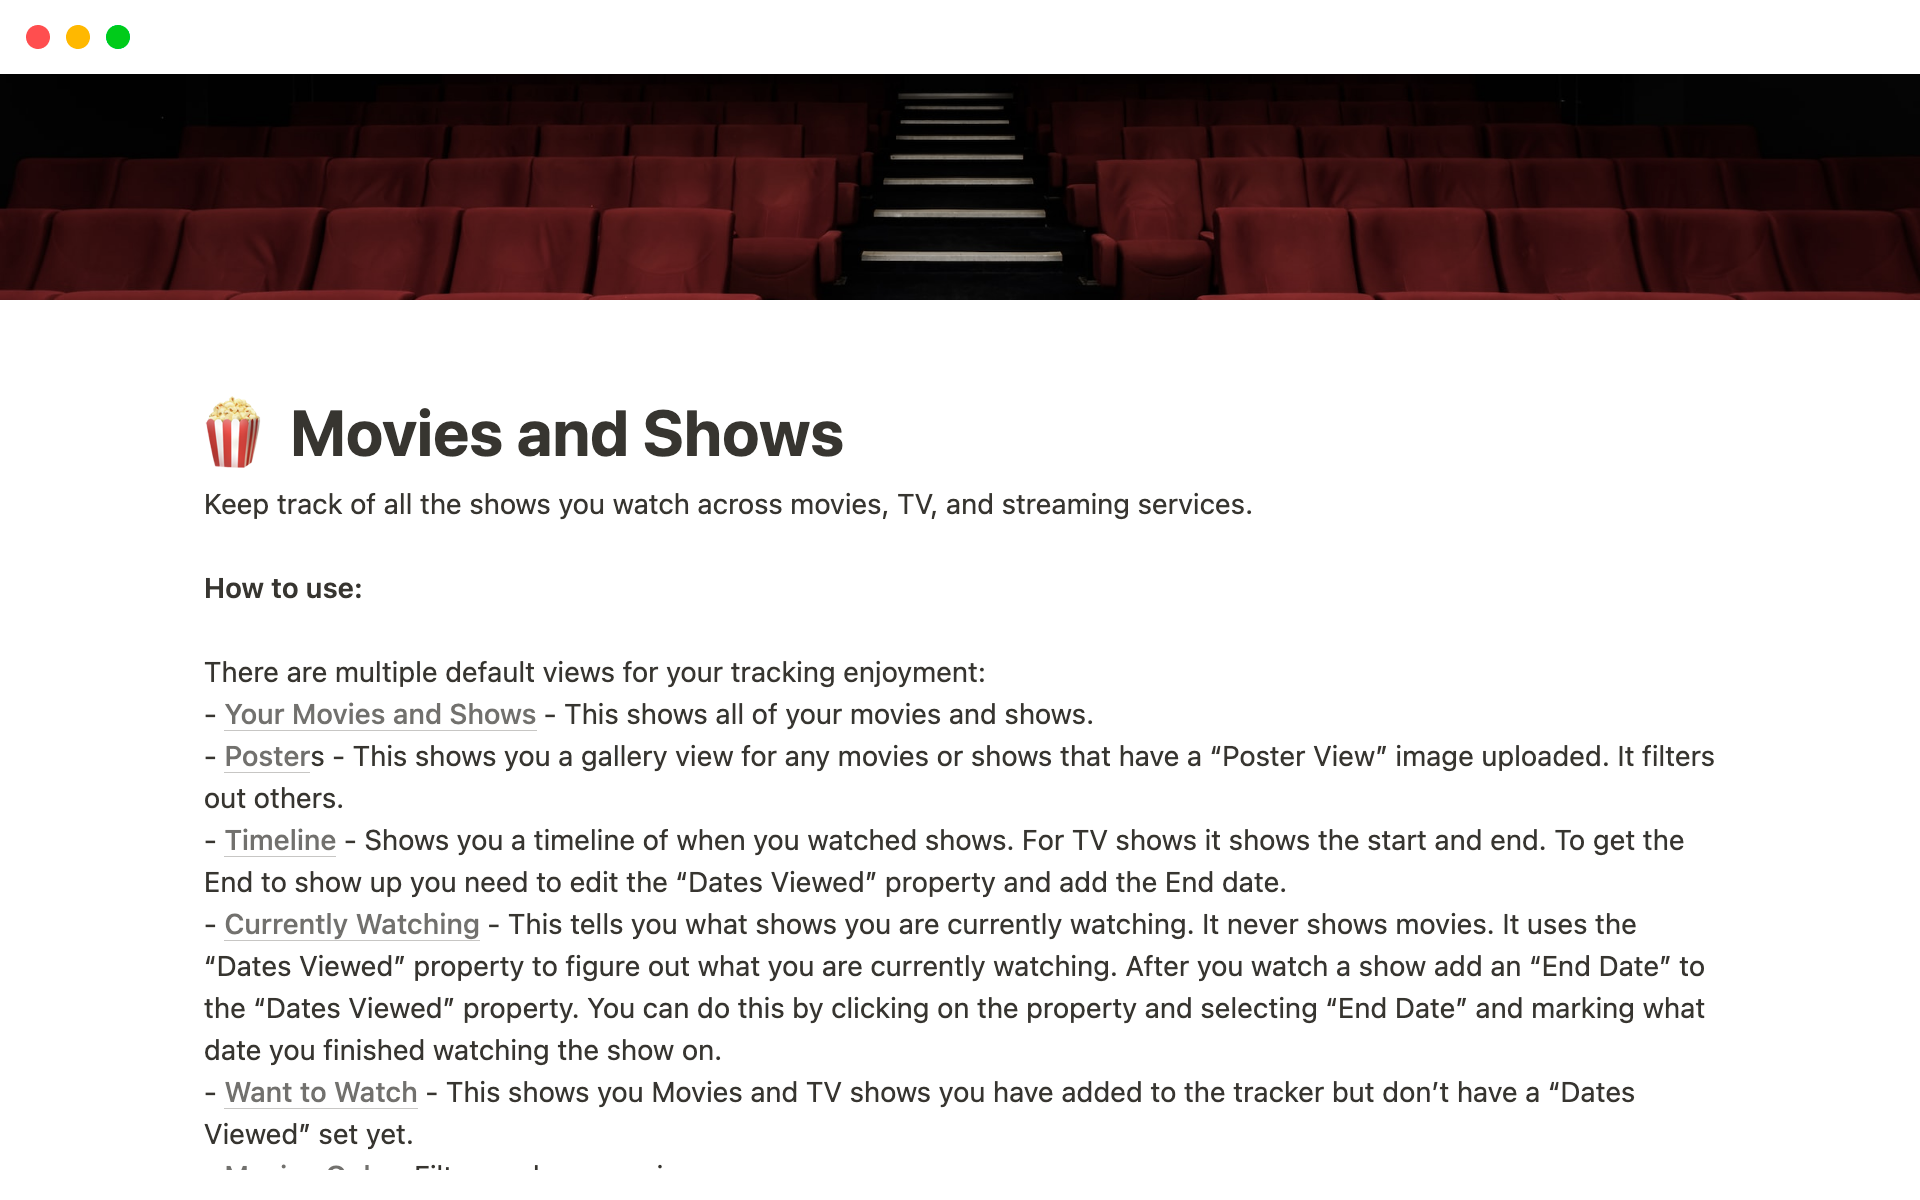 Allows the user to track the movies and shows they watched, the rating, how long it took to watch, and view their list in a variety of different ways.